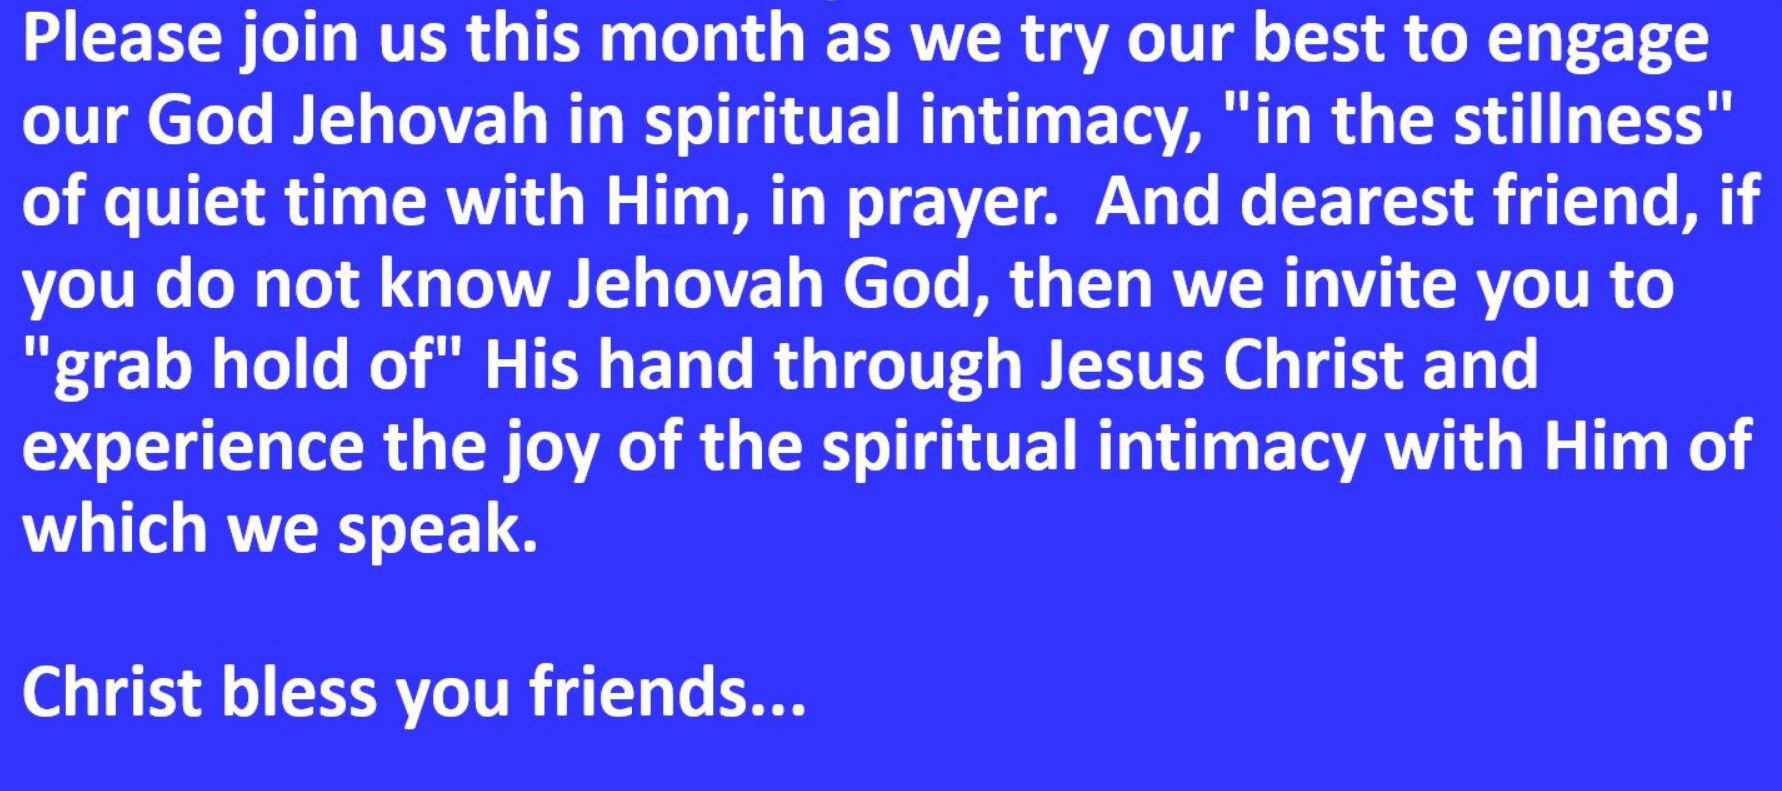 Please join us in April 2024. Spiritual intimacy with God. His outstretched hand take, pierced hand take, reach, just now. Christ bless you dear friends....